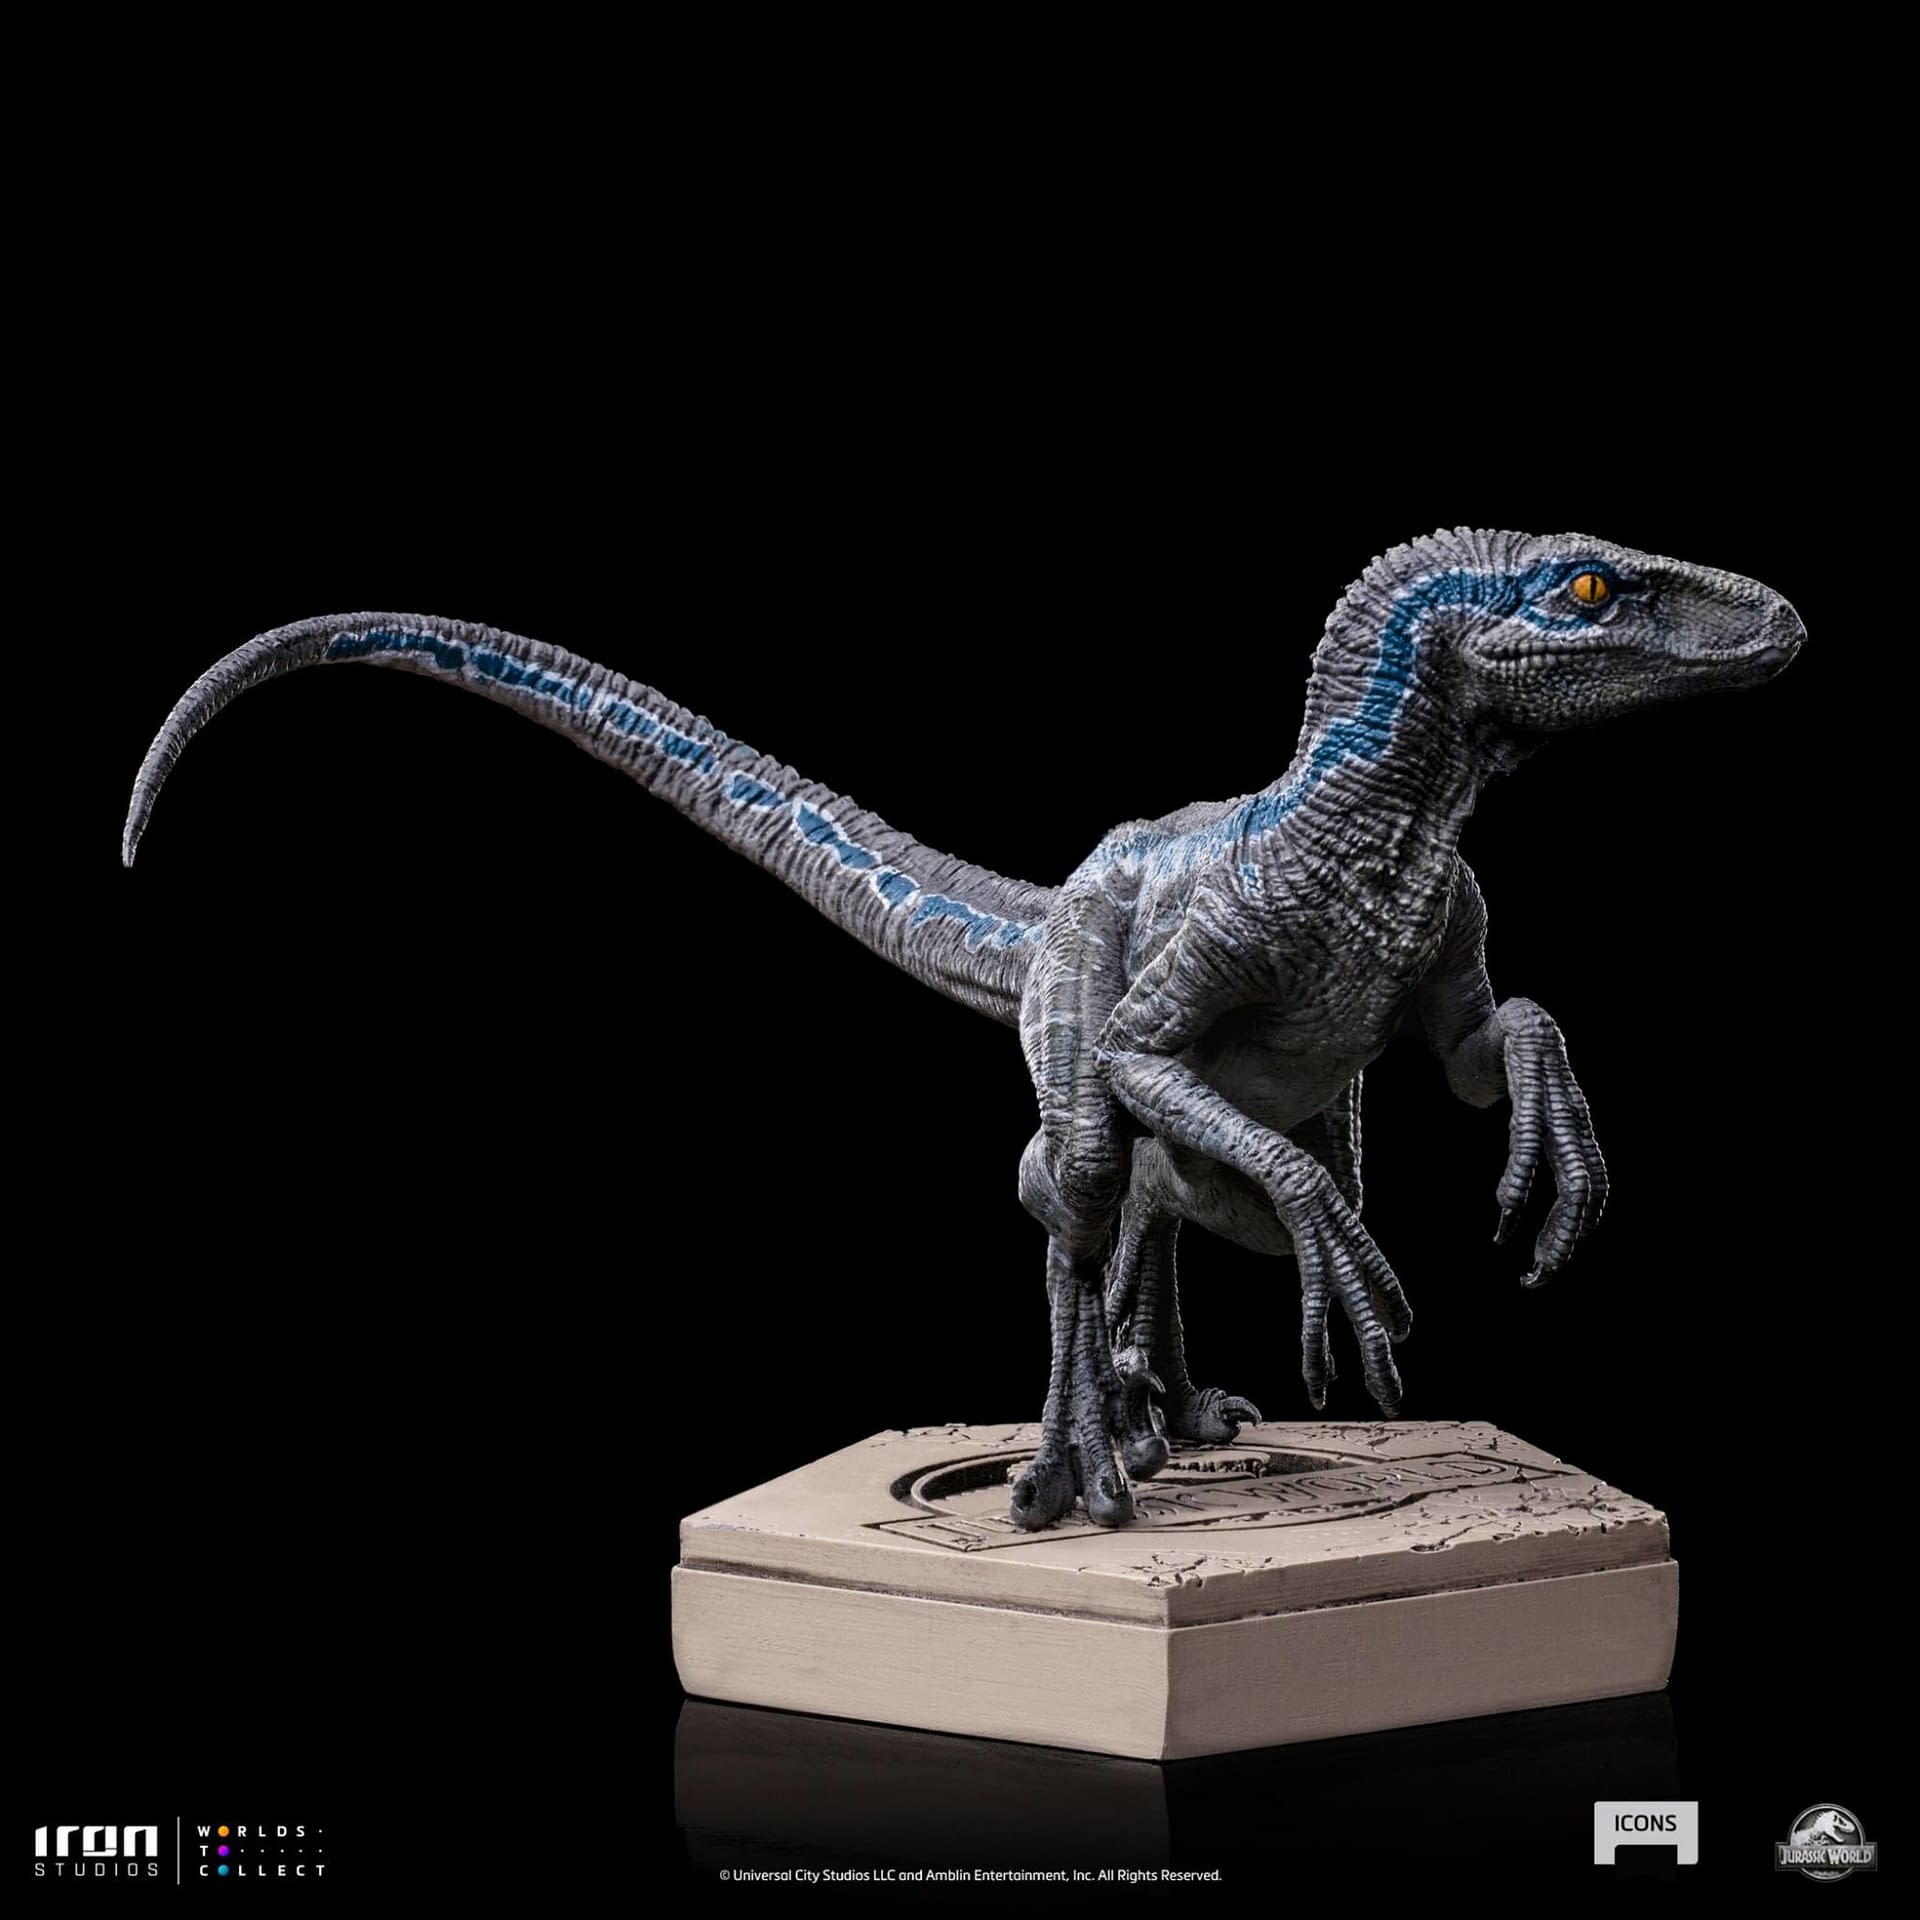 Jurassic Park Raptors Walk the Earth Once Again with Iron Studios